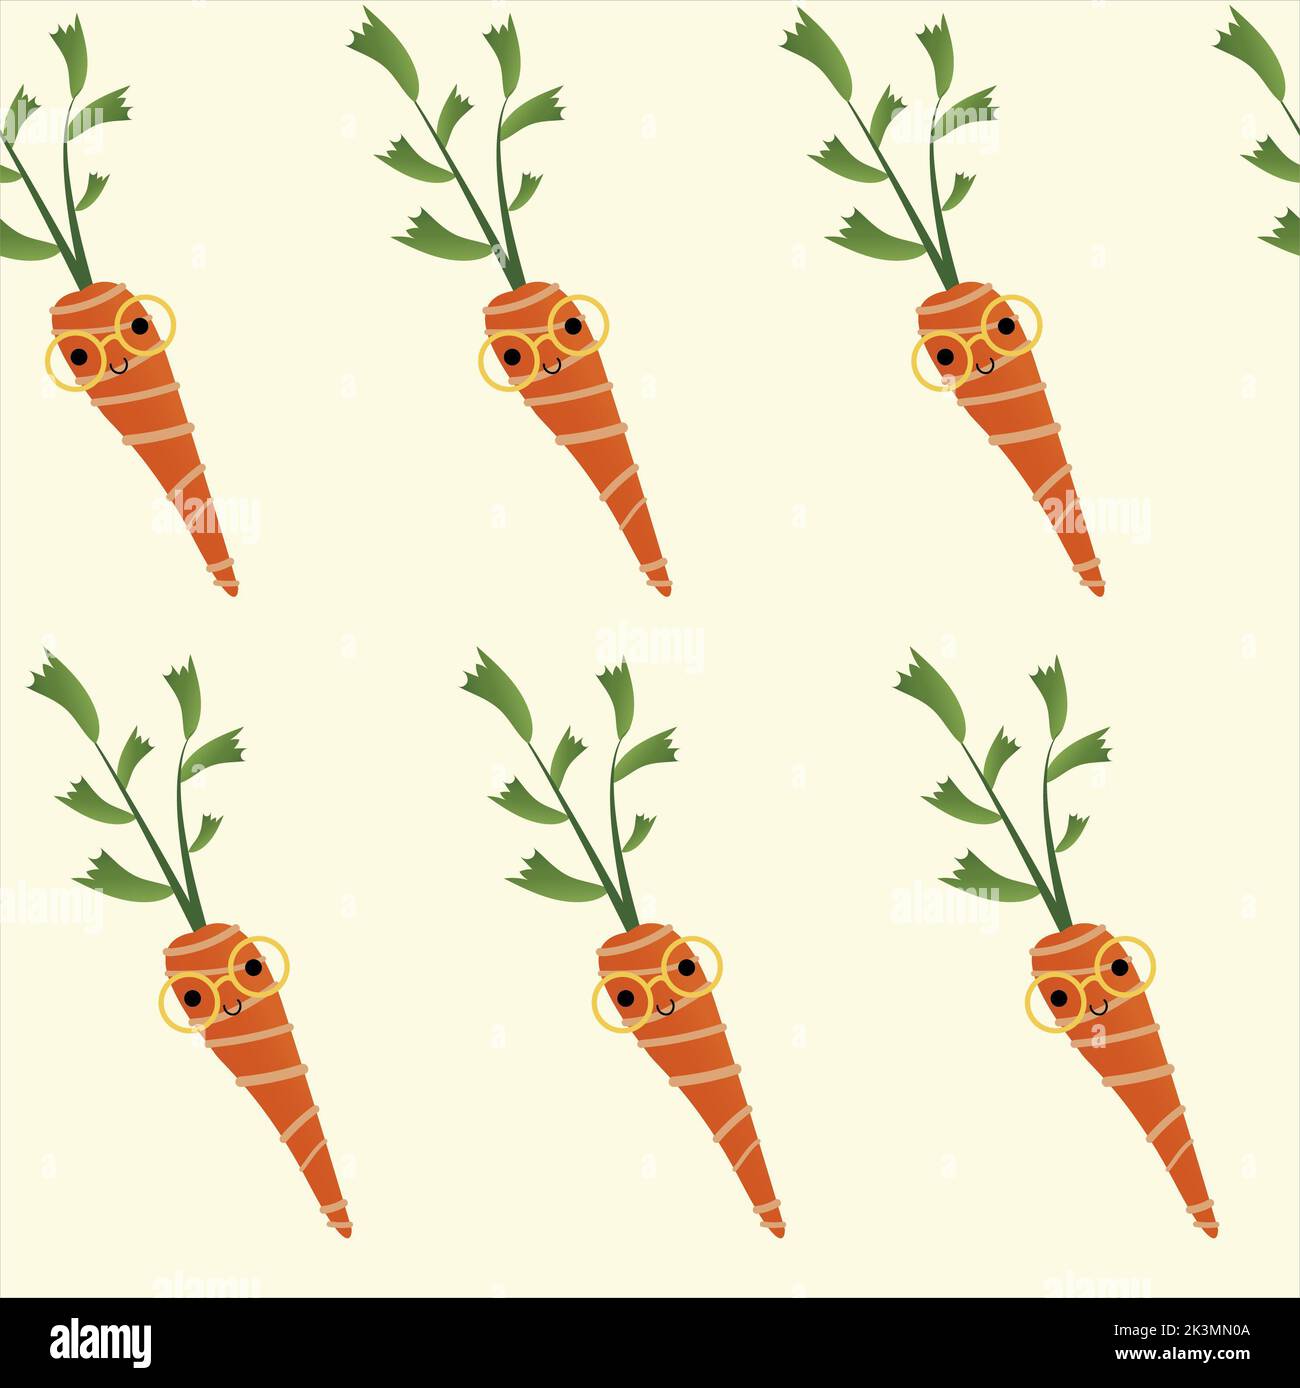 Seamless vector illustration in flat style. Carrots on a yellow background. Use cases are printing, wallpaper, wrapping paper, design, textiles, noteb Stock Photo